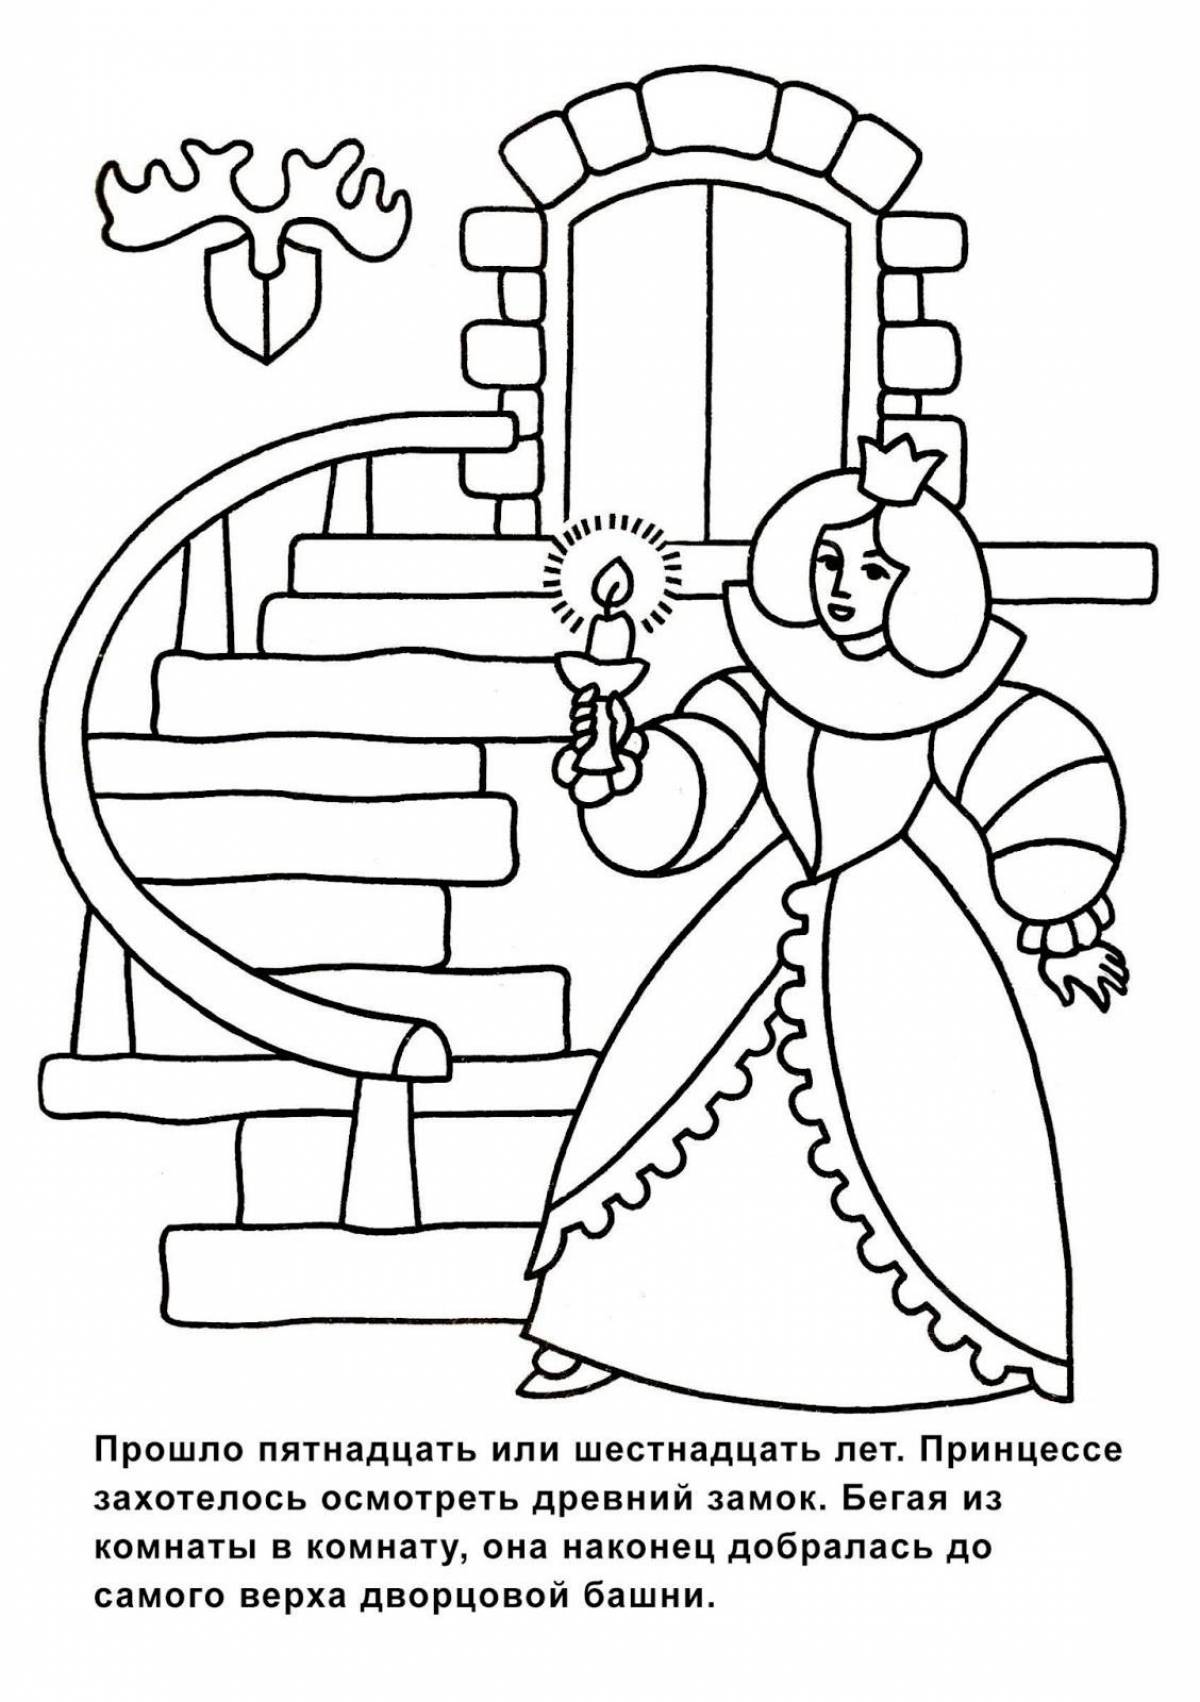 Charles Perrault's charming coloring book